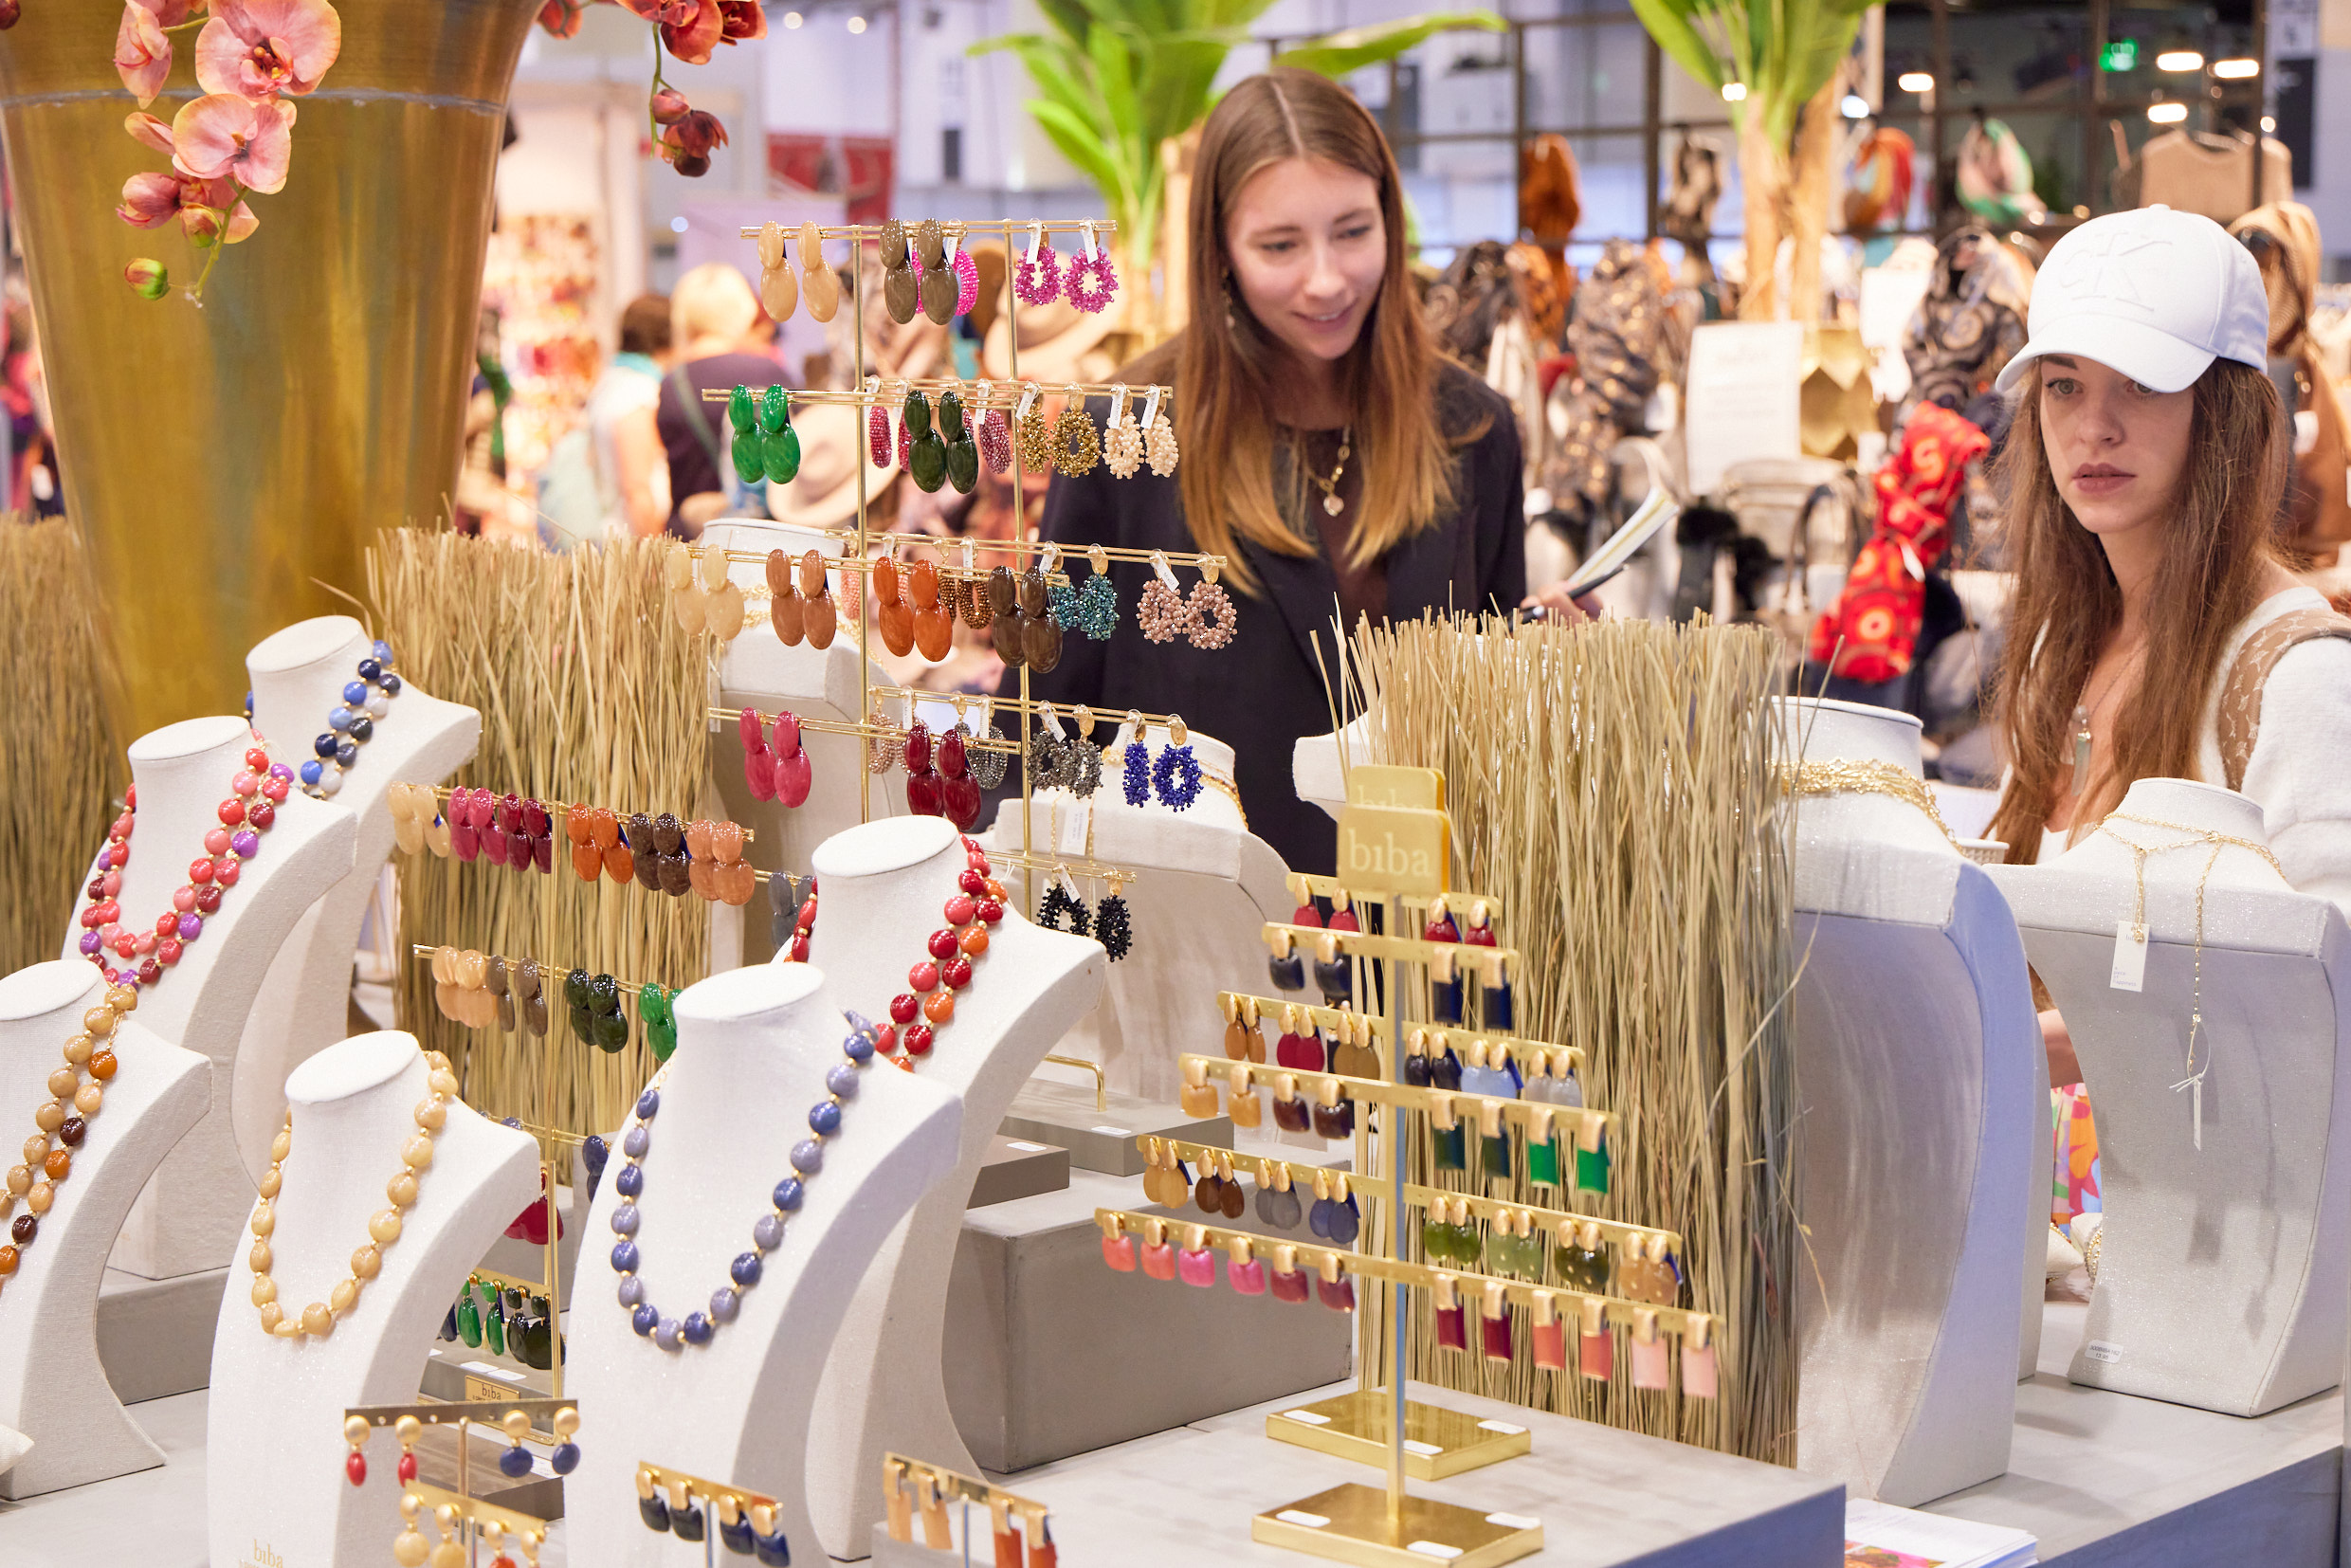 The Jewellery & Fashion area at Nordstil offers a unique variety of products.